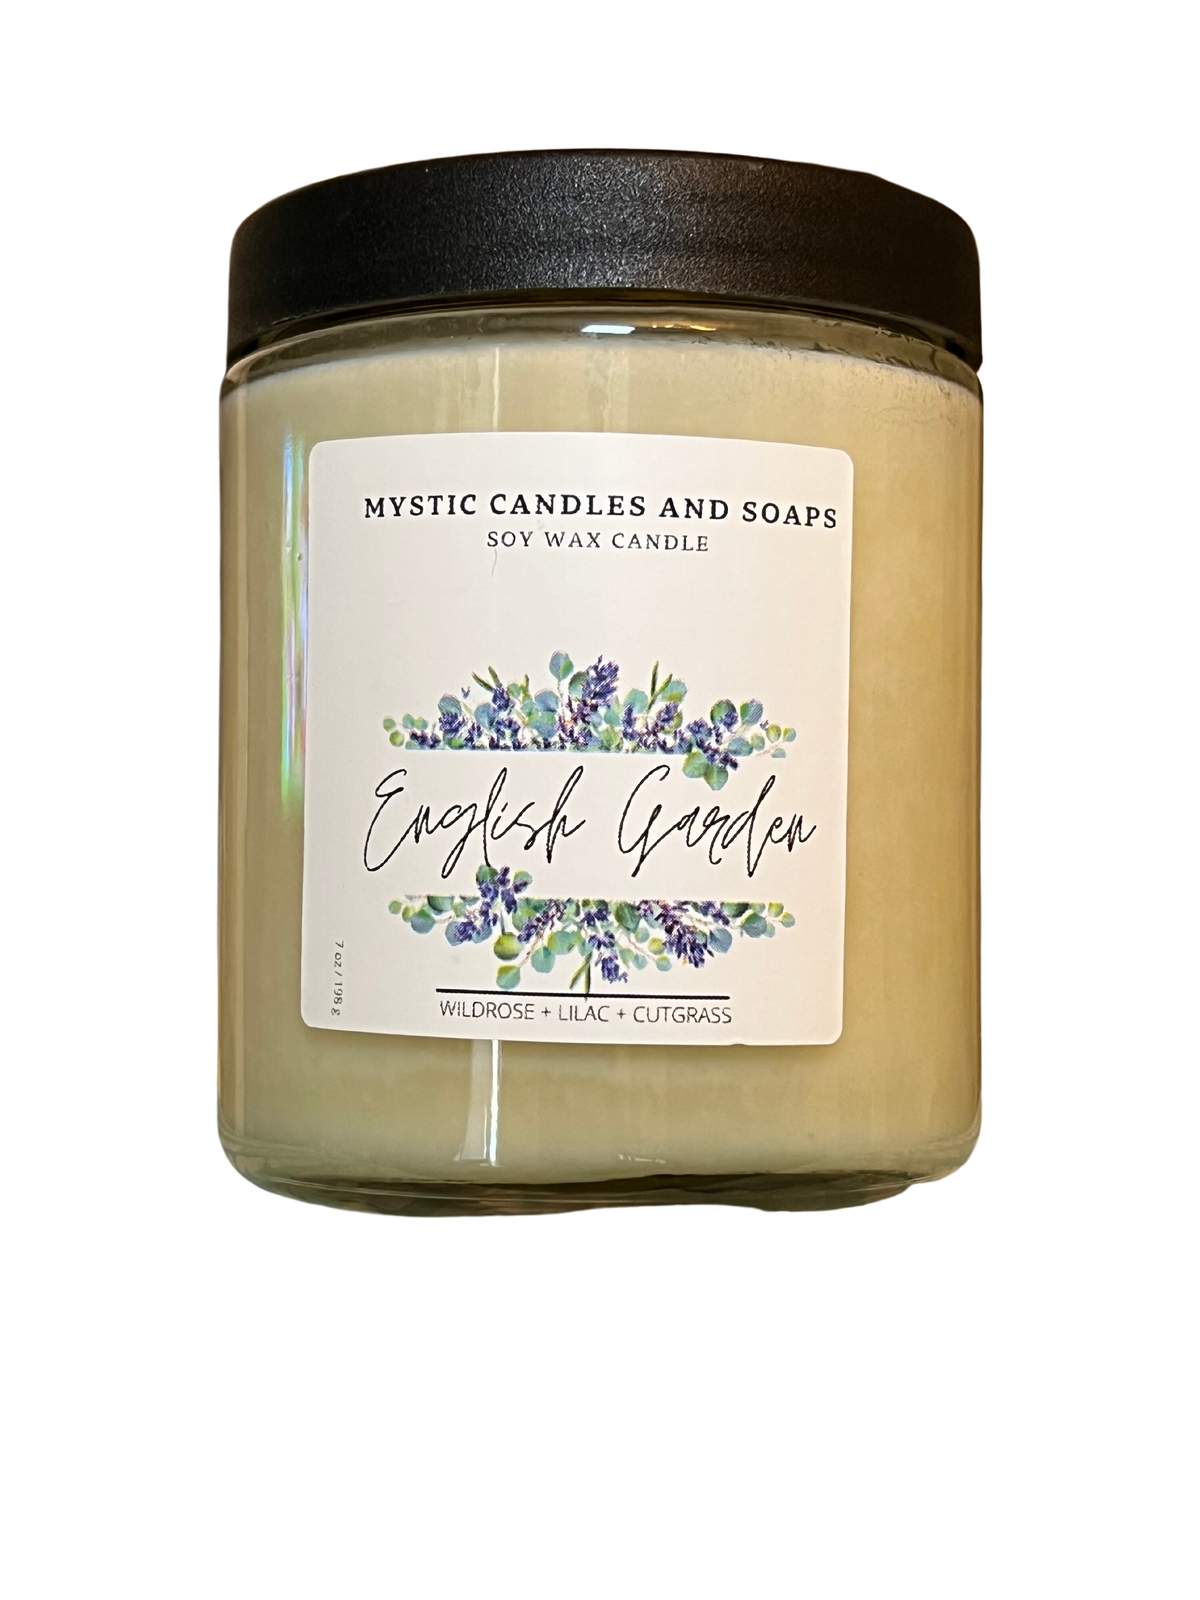 English Garden Candle - Mystic Candles and Soaps LLC